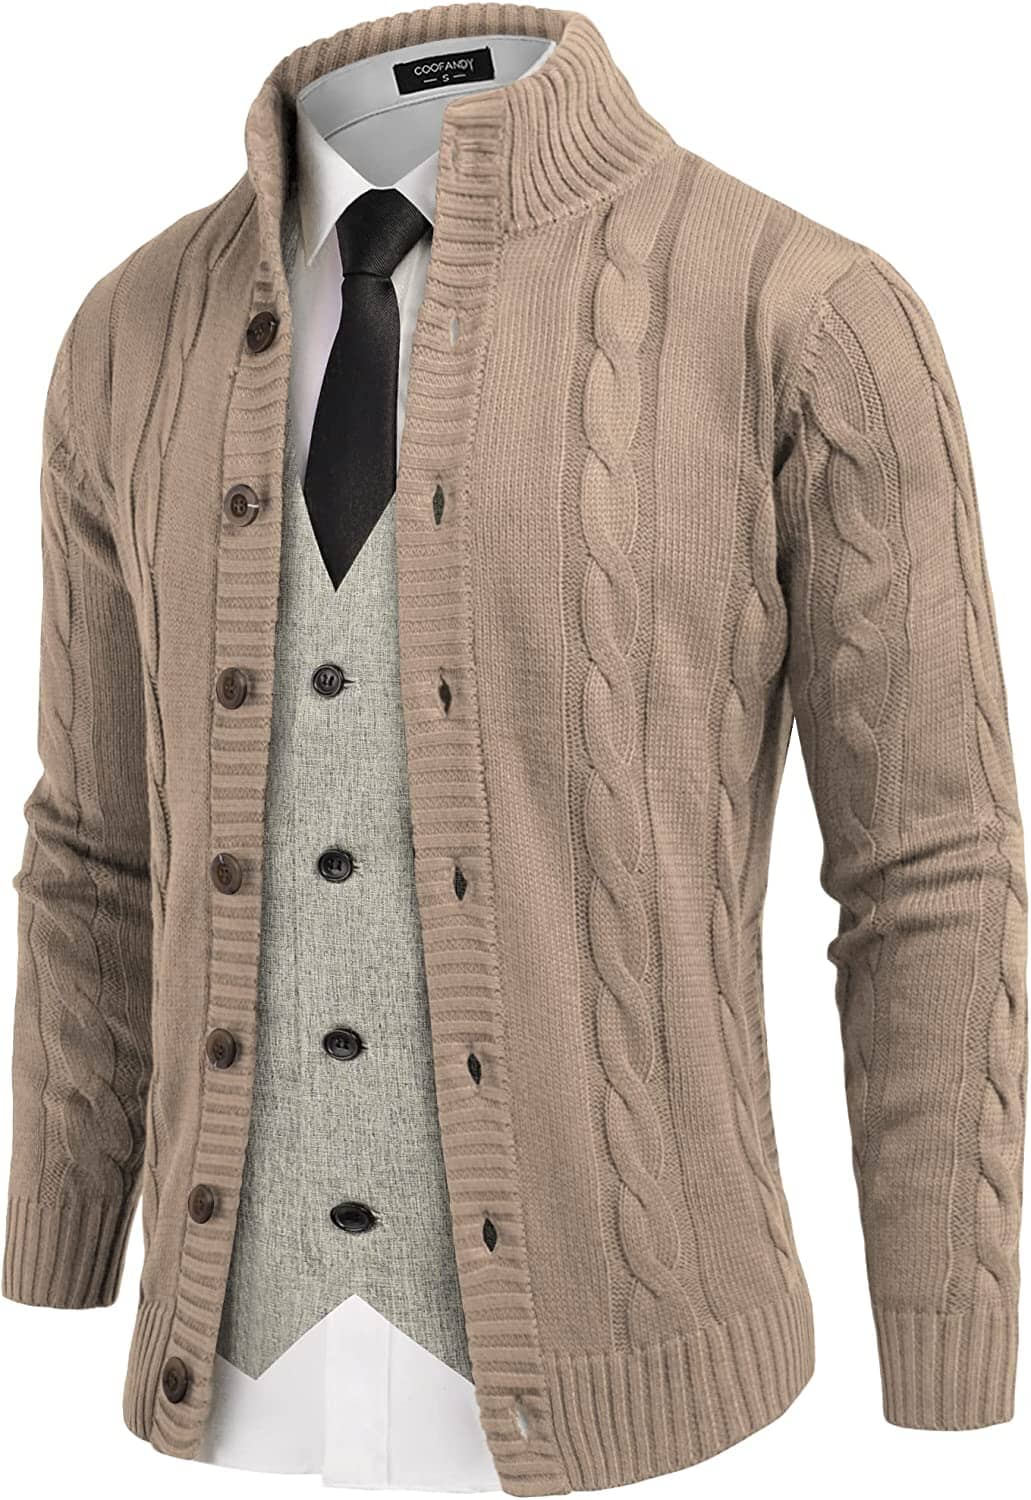 Coofandy Cardigan Cable Knitted Button Down Sweater (US Only) Sweaters COOFANDY Store Khaki S 